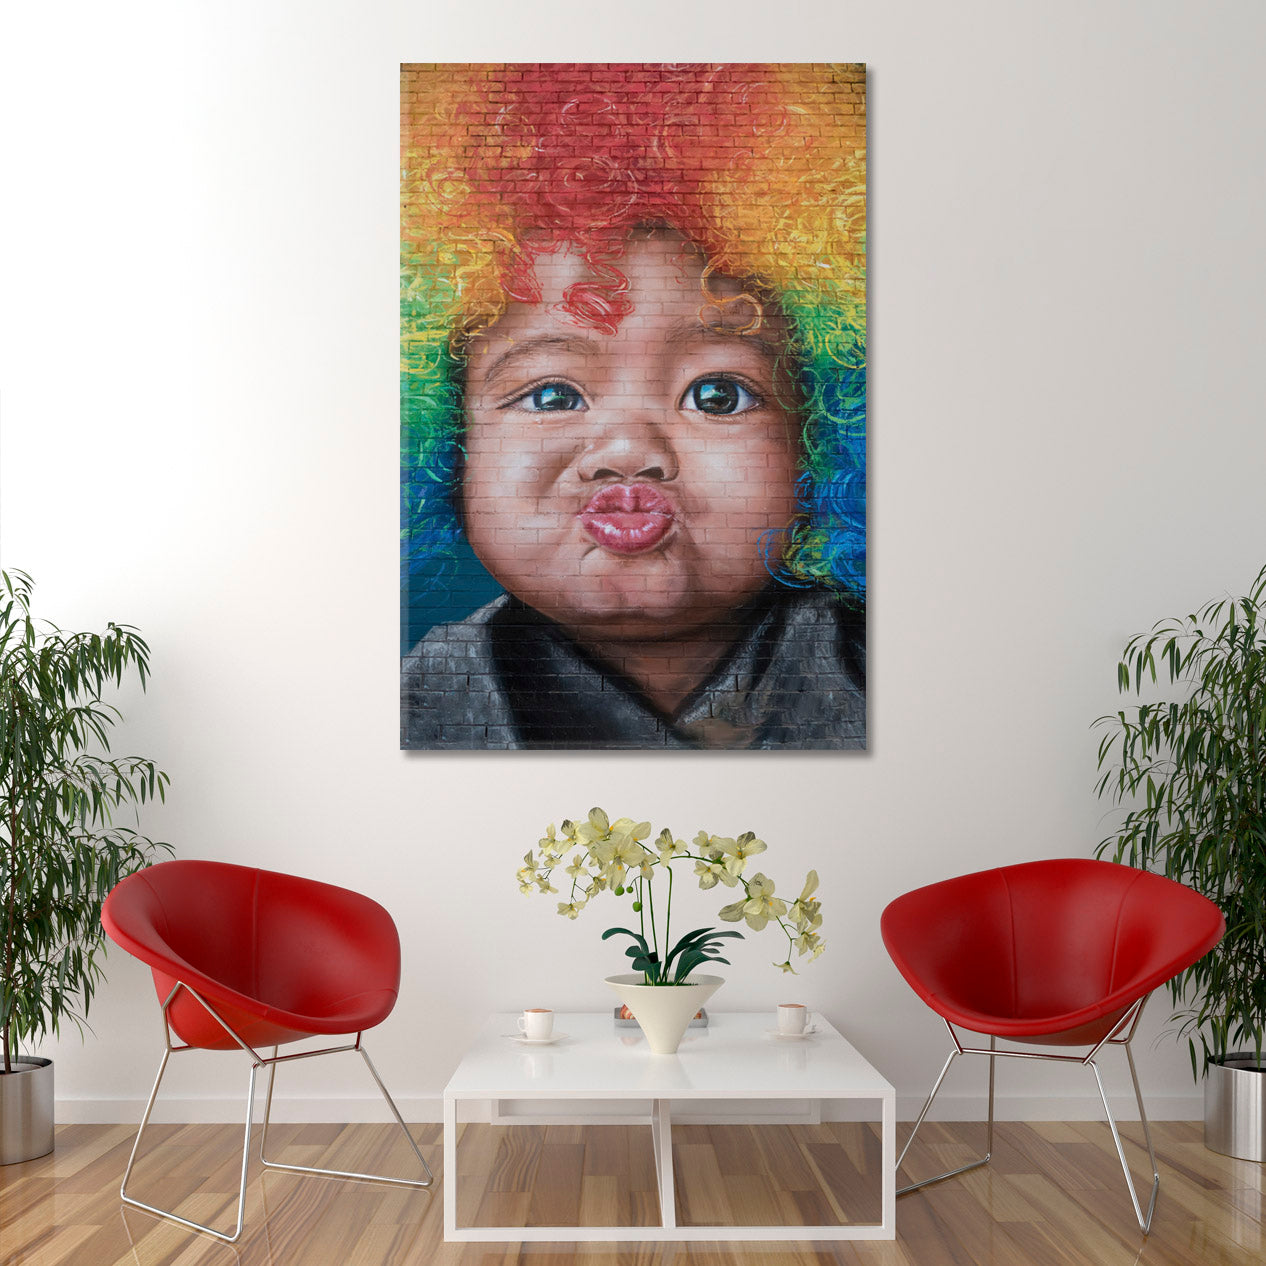 CUTE BABY Colourful Street Art People Portrait Wall Hangings Artesty 1 Panel 16"x24" 